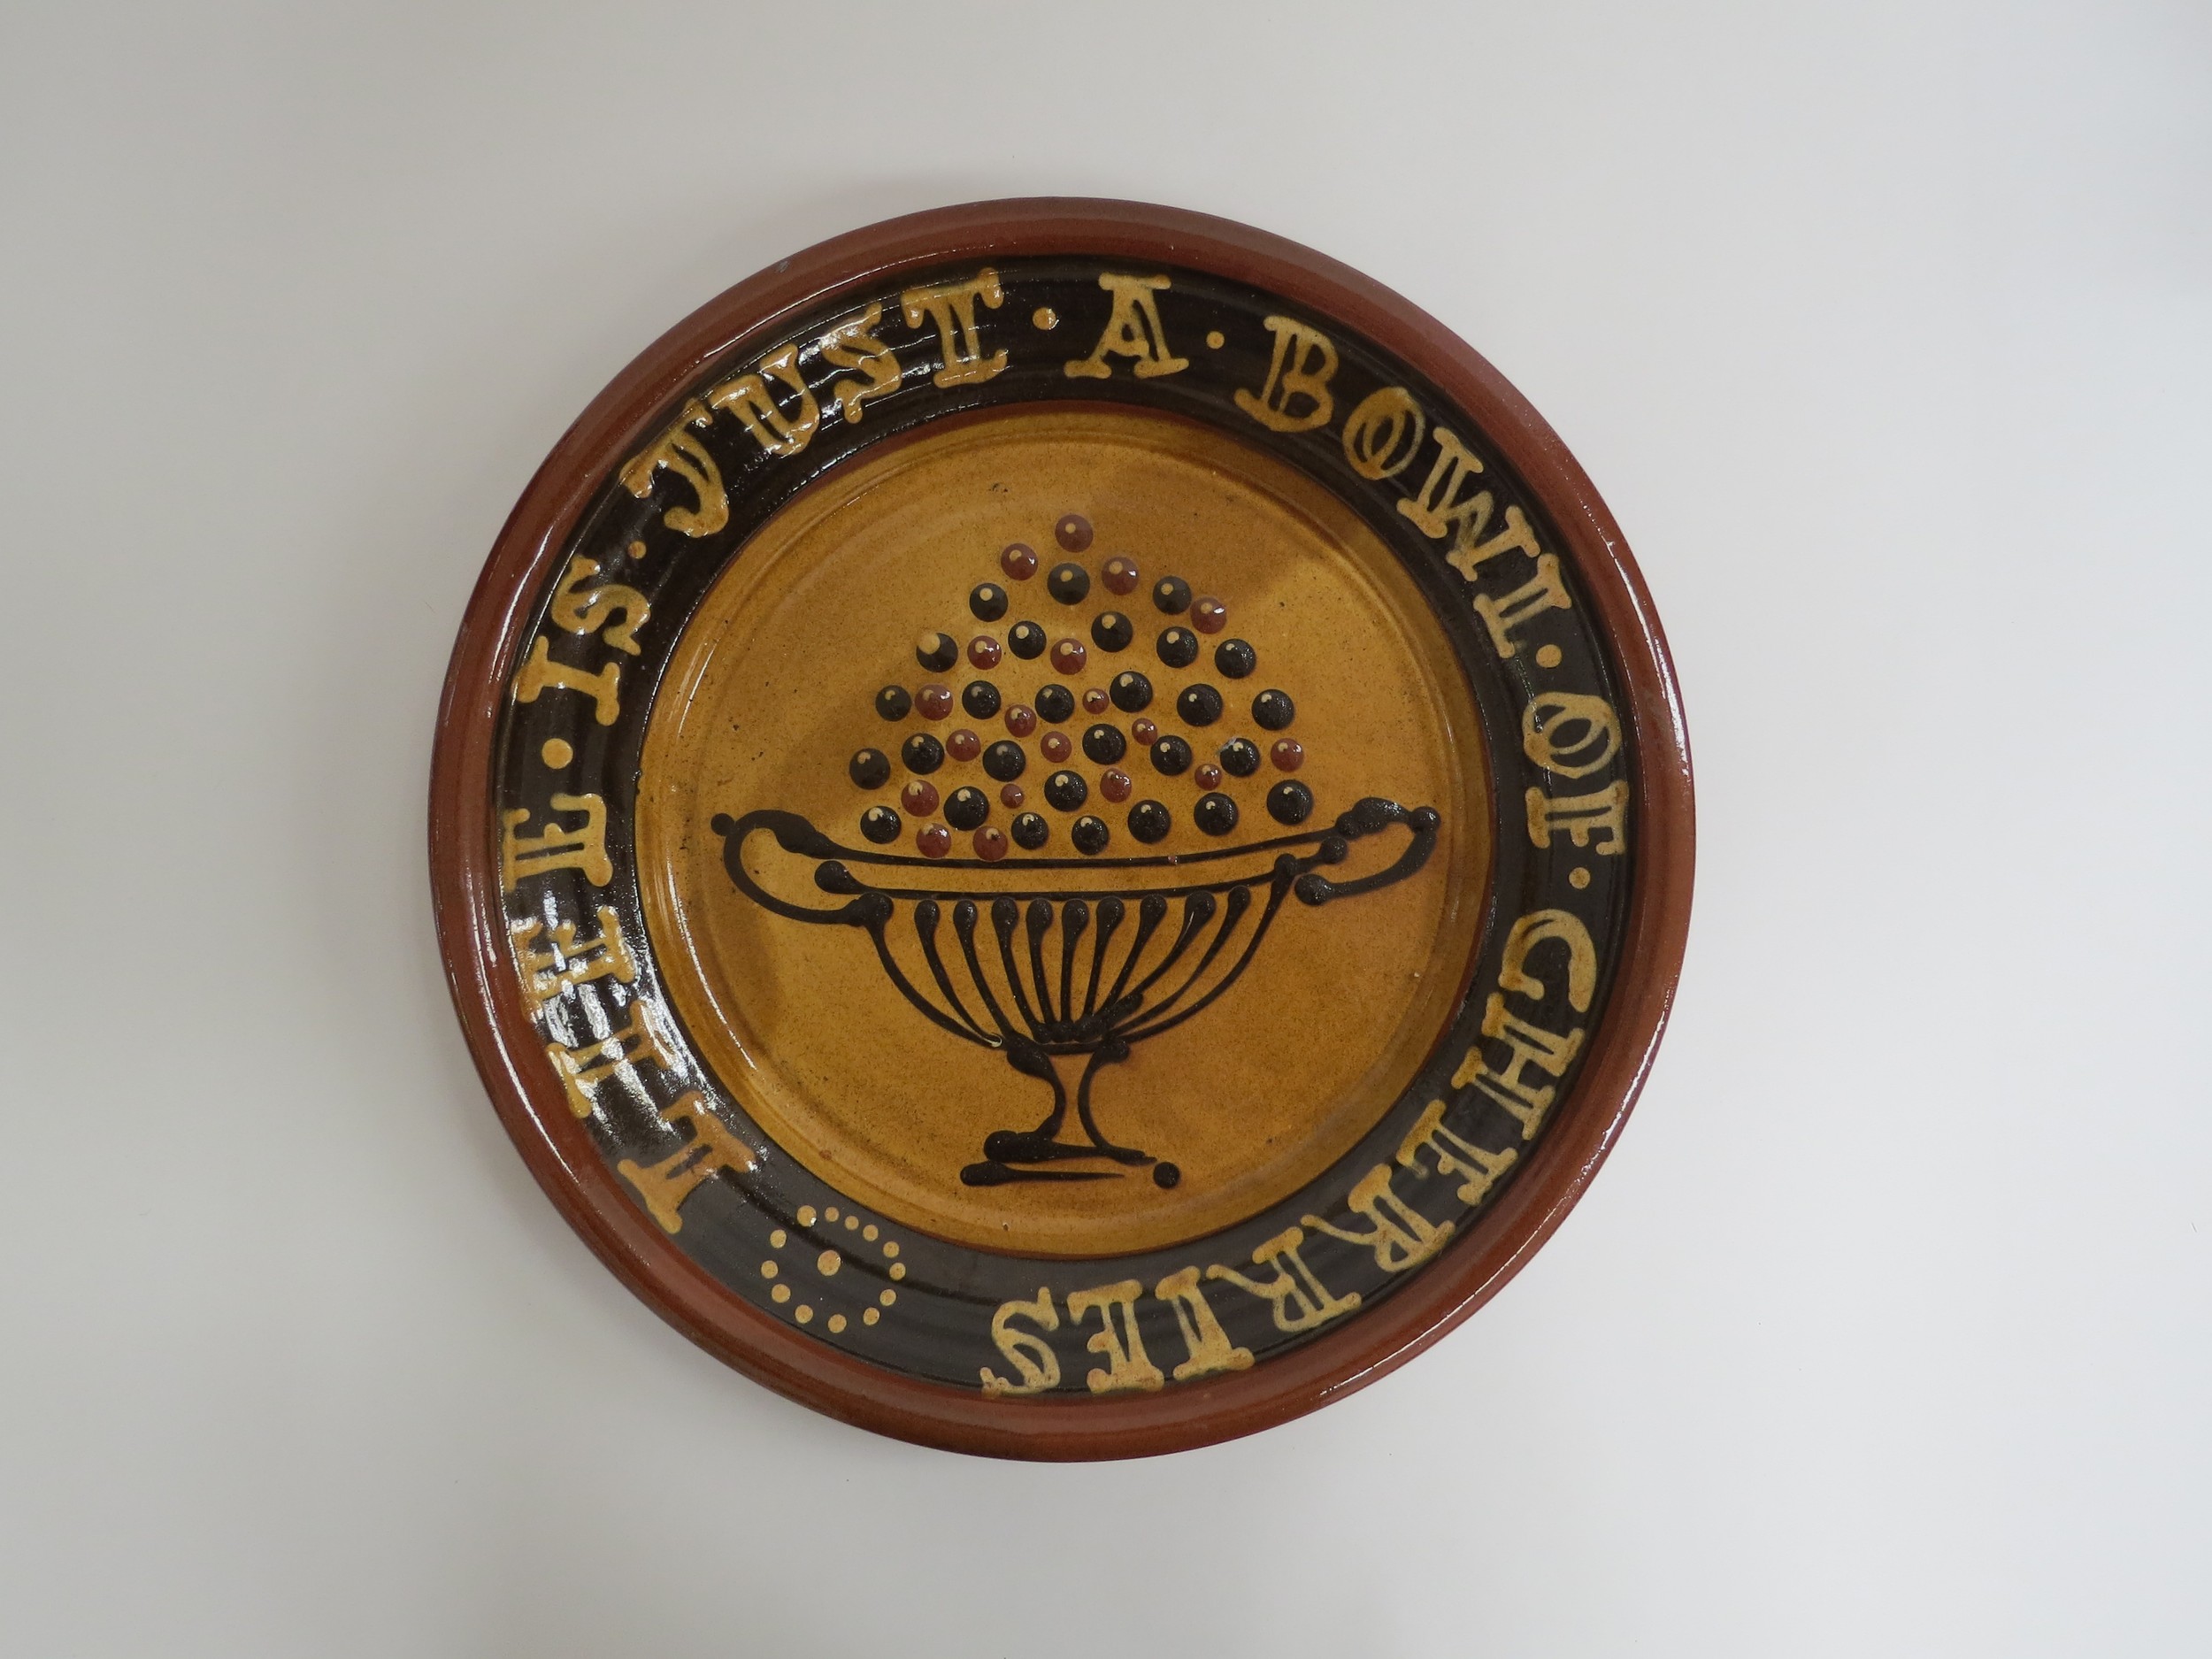 A Bredon Pottery slipware charger by Tony & Sue Davies, 'Life Is Just A Bowl Of Cherries'. Label